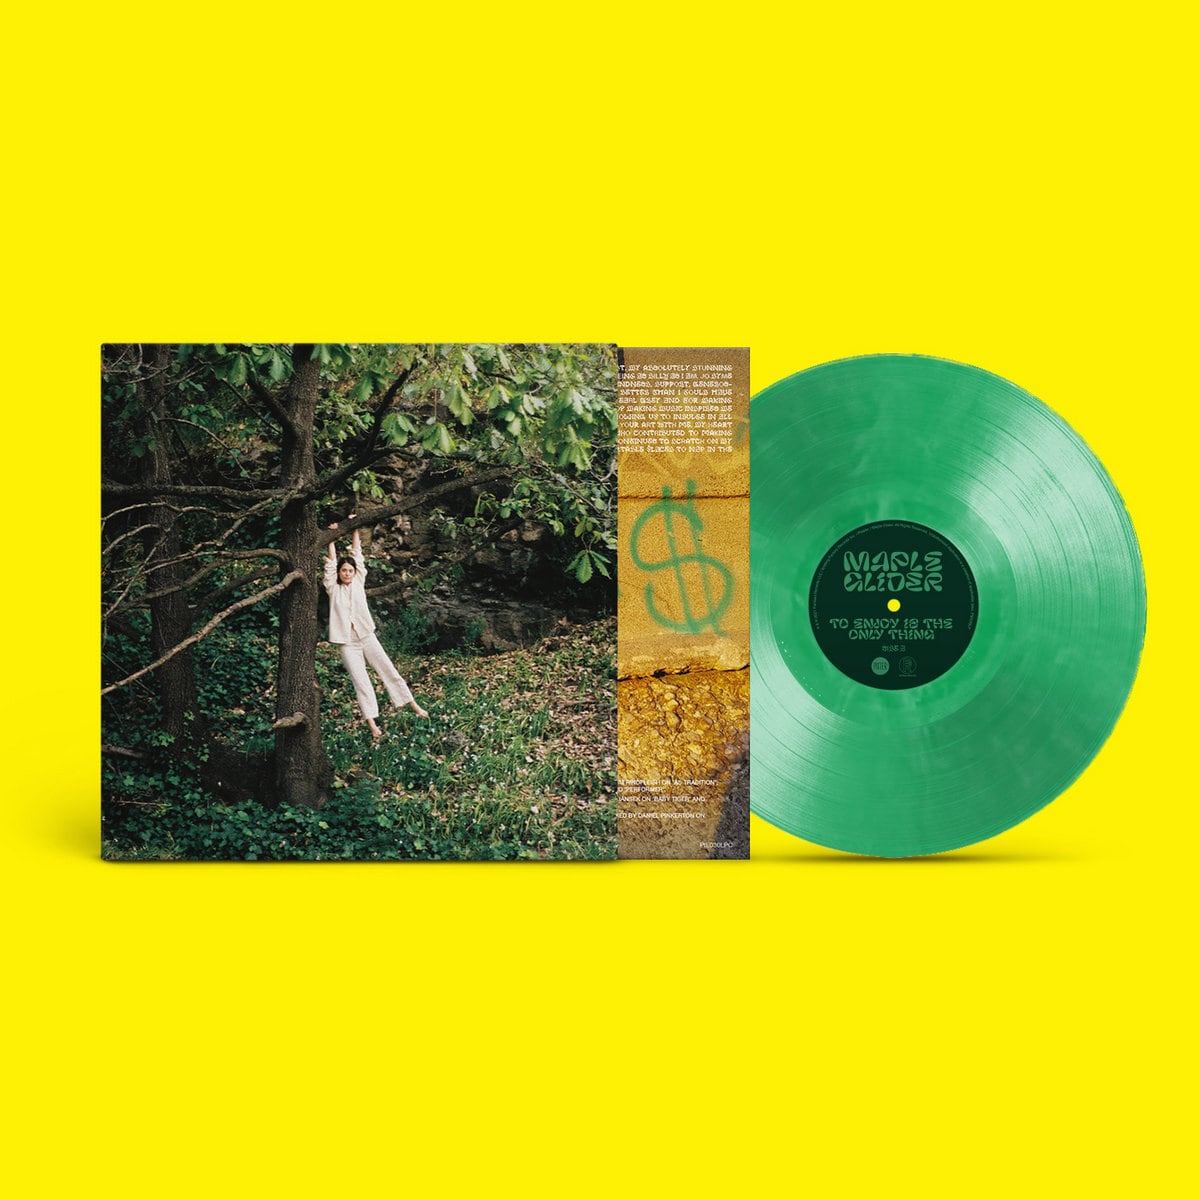 Maple Glider / To Enjoy is the Only Thing（Ltd Green LP）